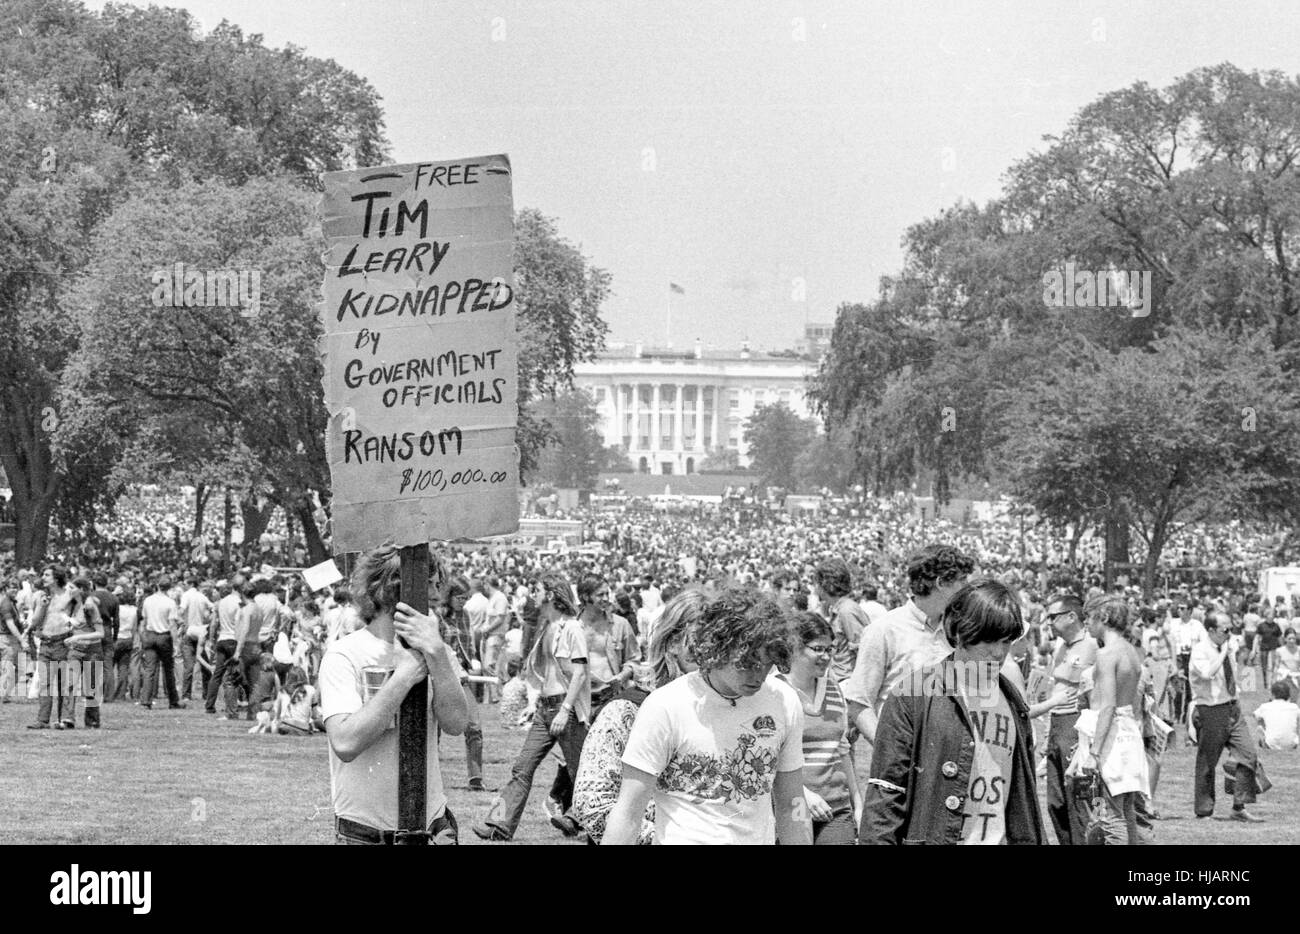 Man carries sign reading 'Free Tim Leary' in a large crowd in front of the White House. Stock Photo